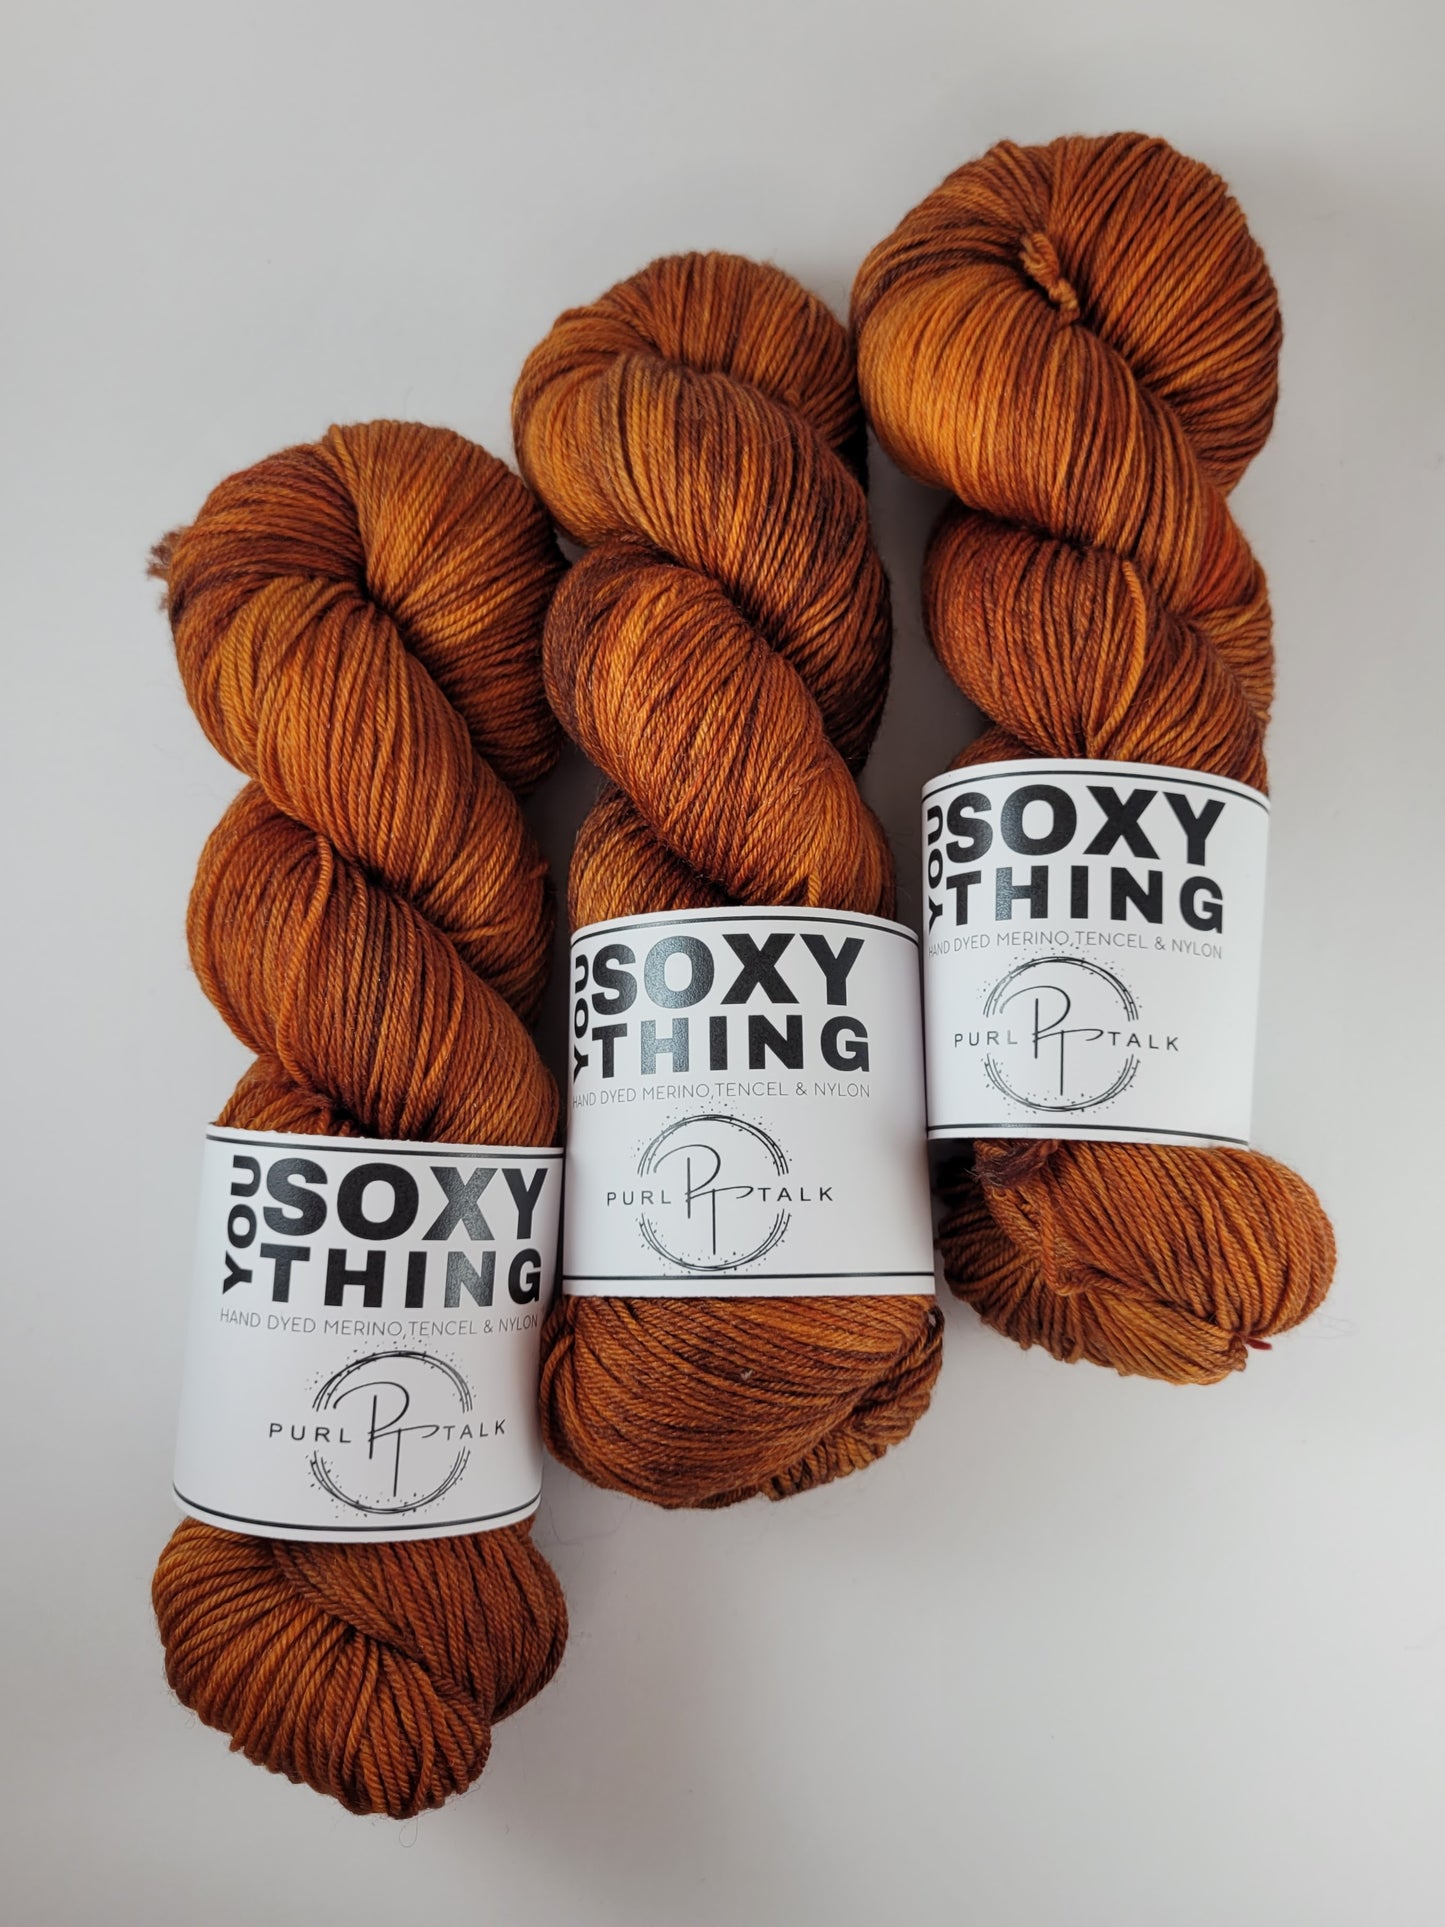 You Soxy Thing:  Mad About Saffron, tonal